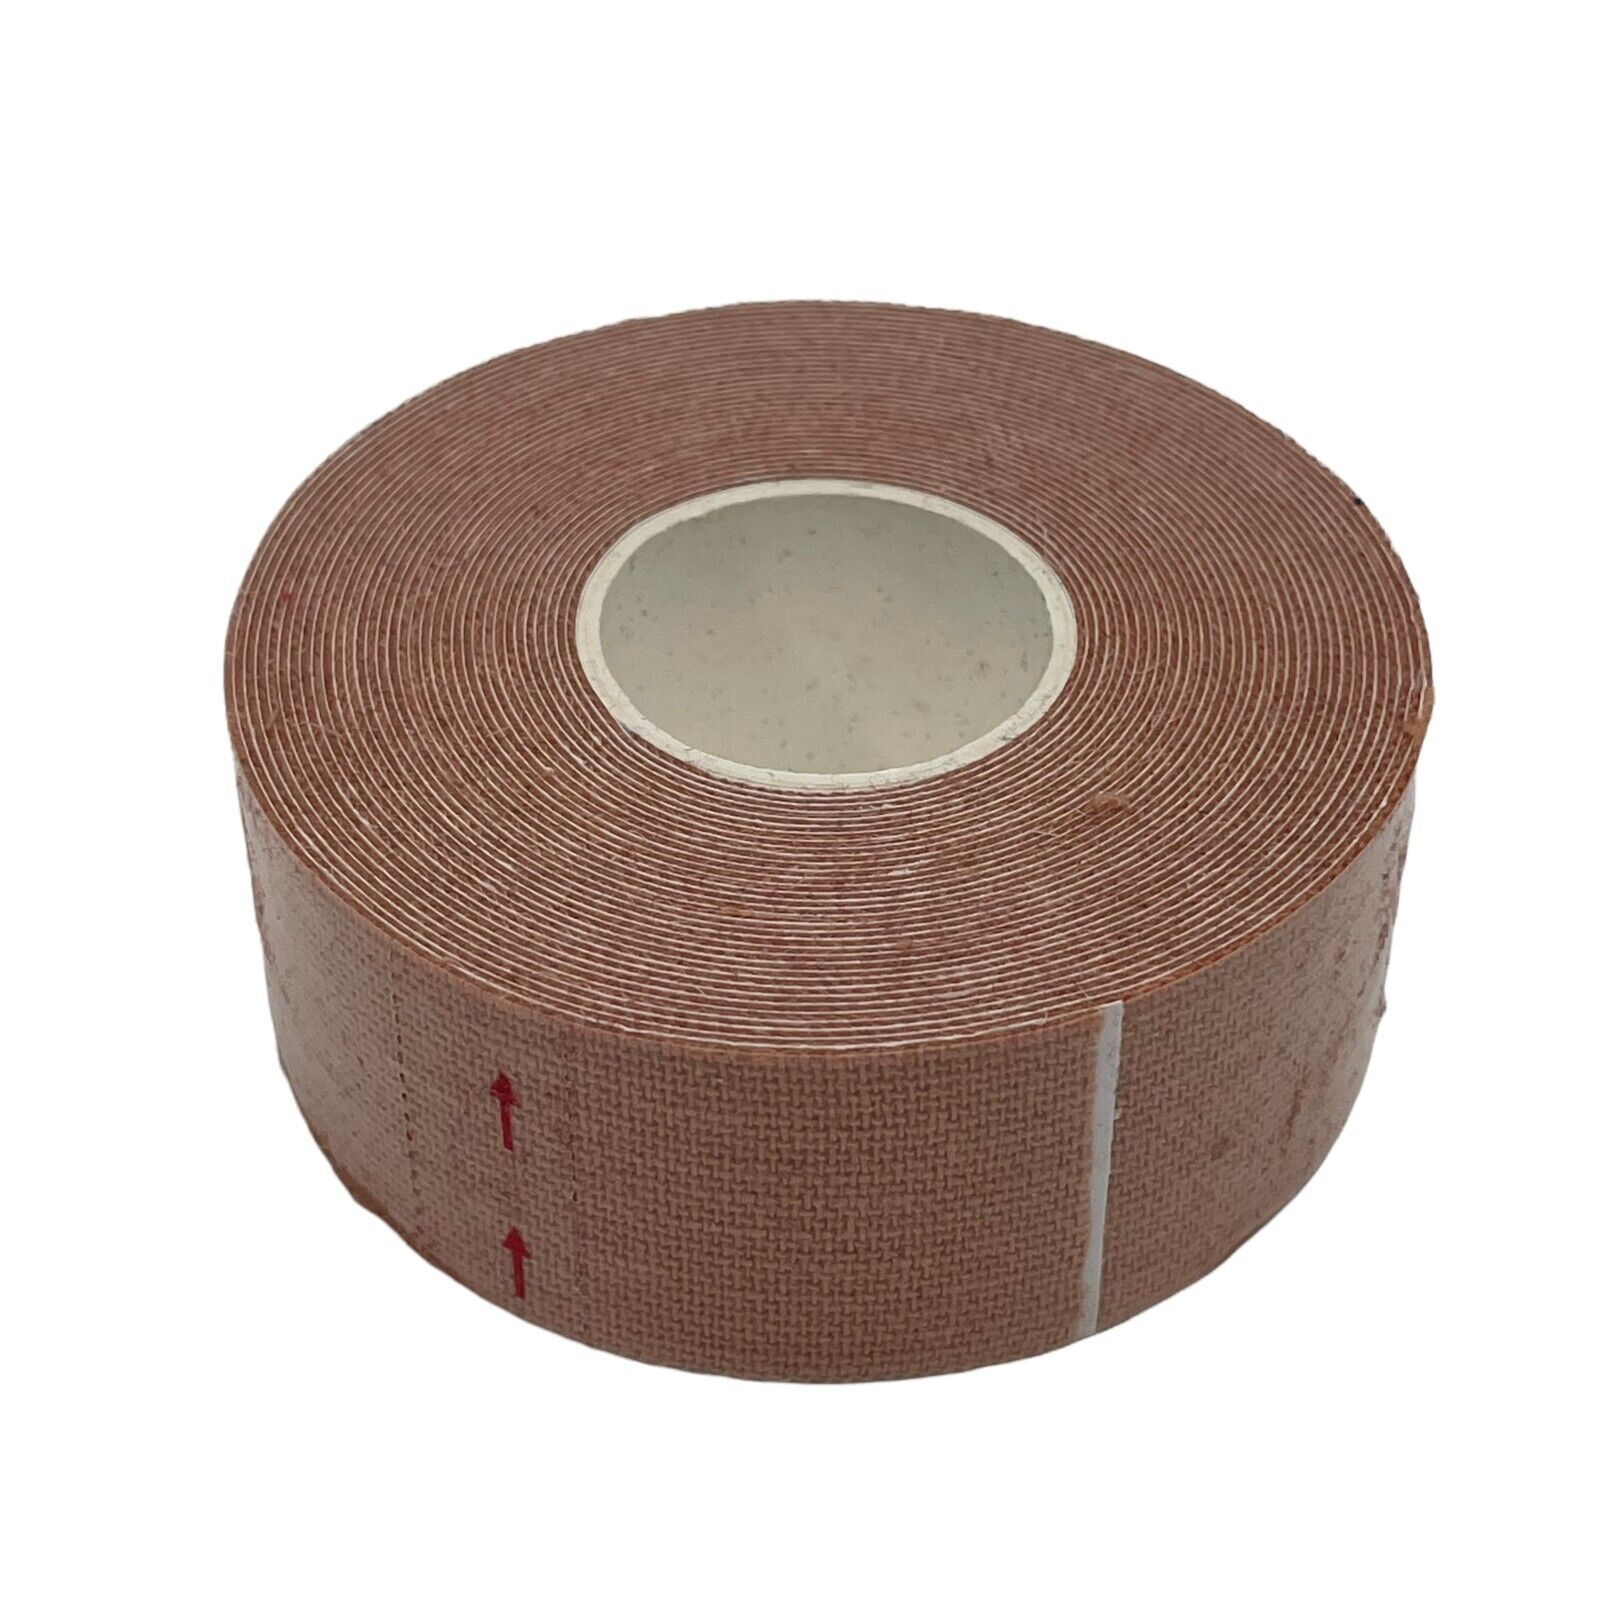 Wholesale Lot x 6 Rolls of Bowling Thumb Finger Hada Patch Protection Tape Unbranded Does Not Apply - фотография #12